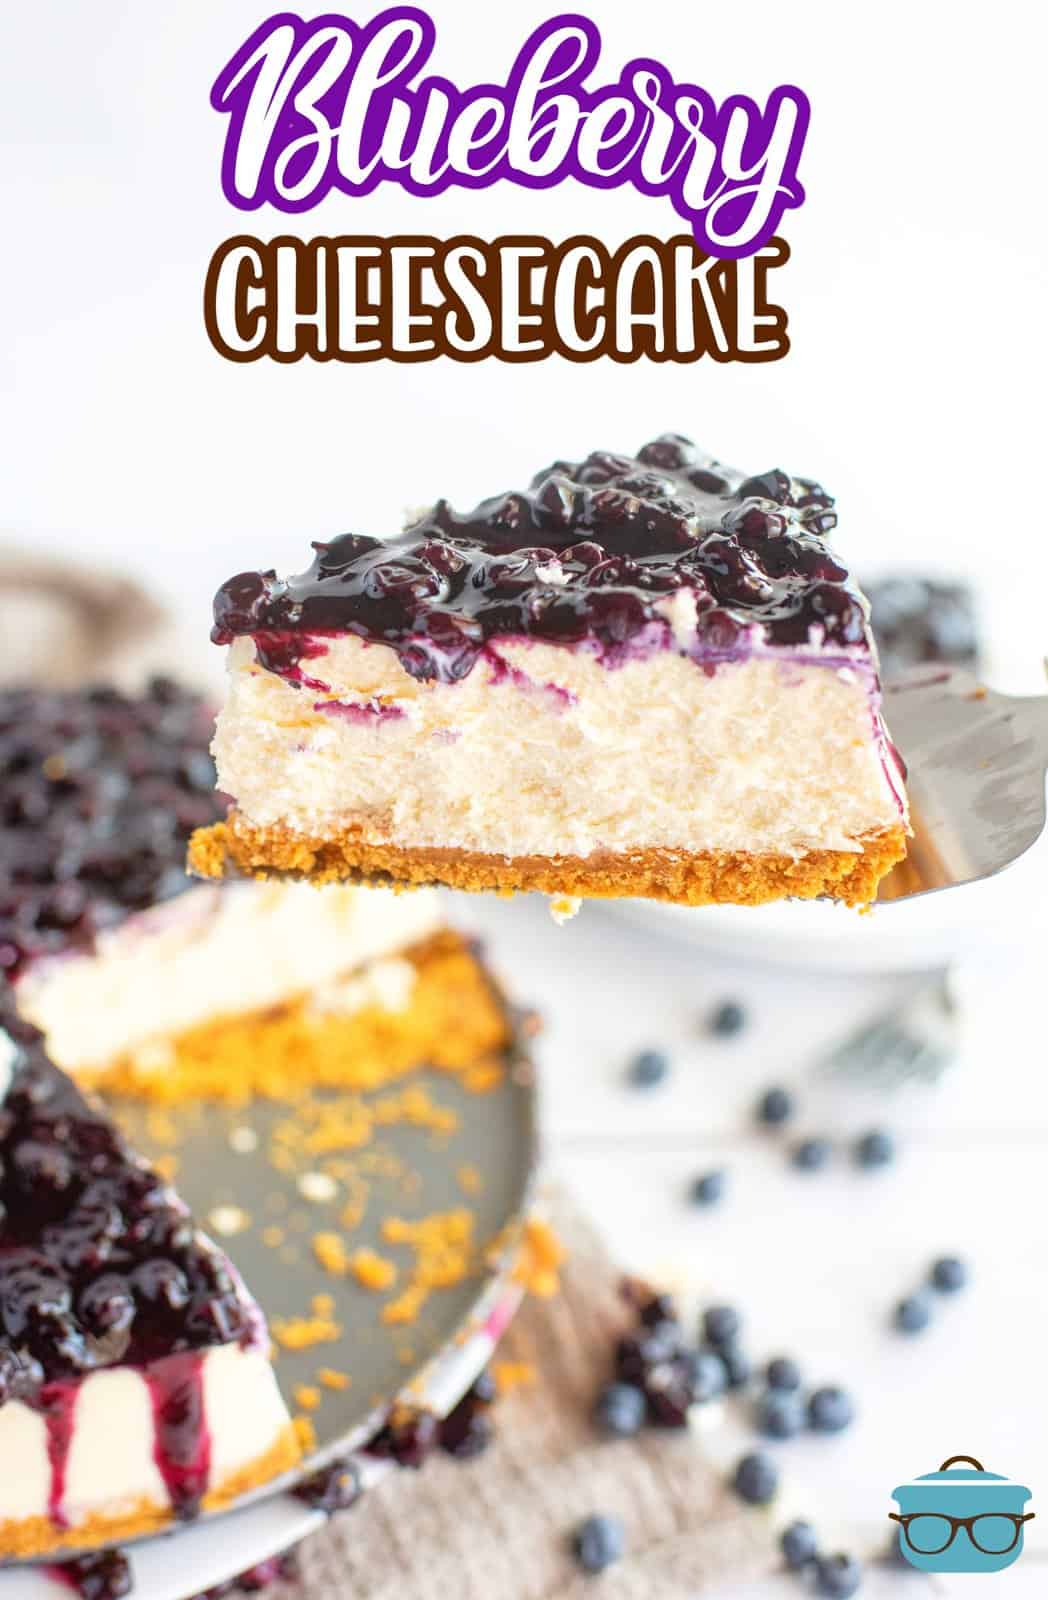 Pie server holding up a slice of Blueberry Cheesecake cut from pan, Pinterest image.